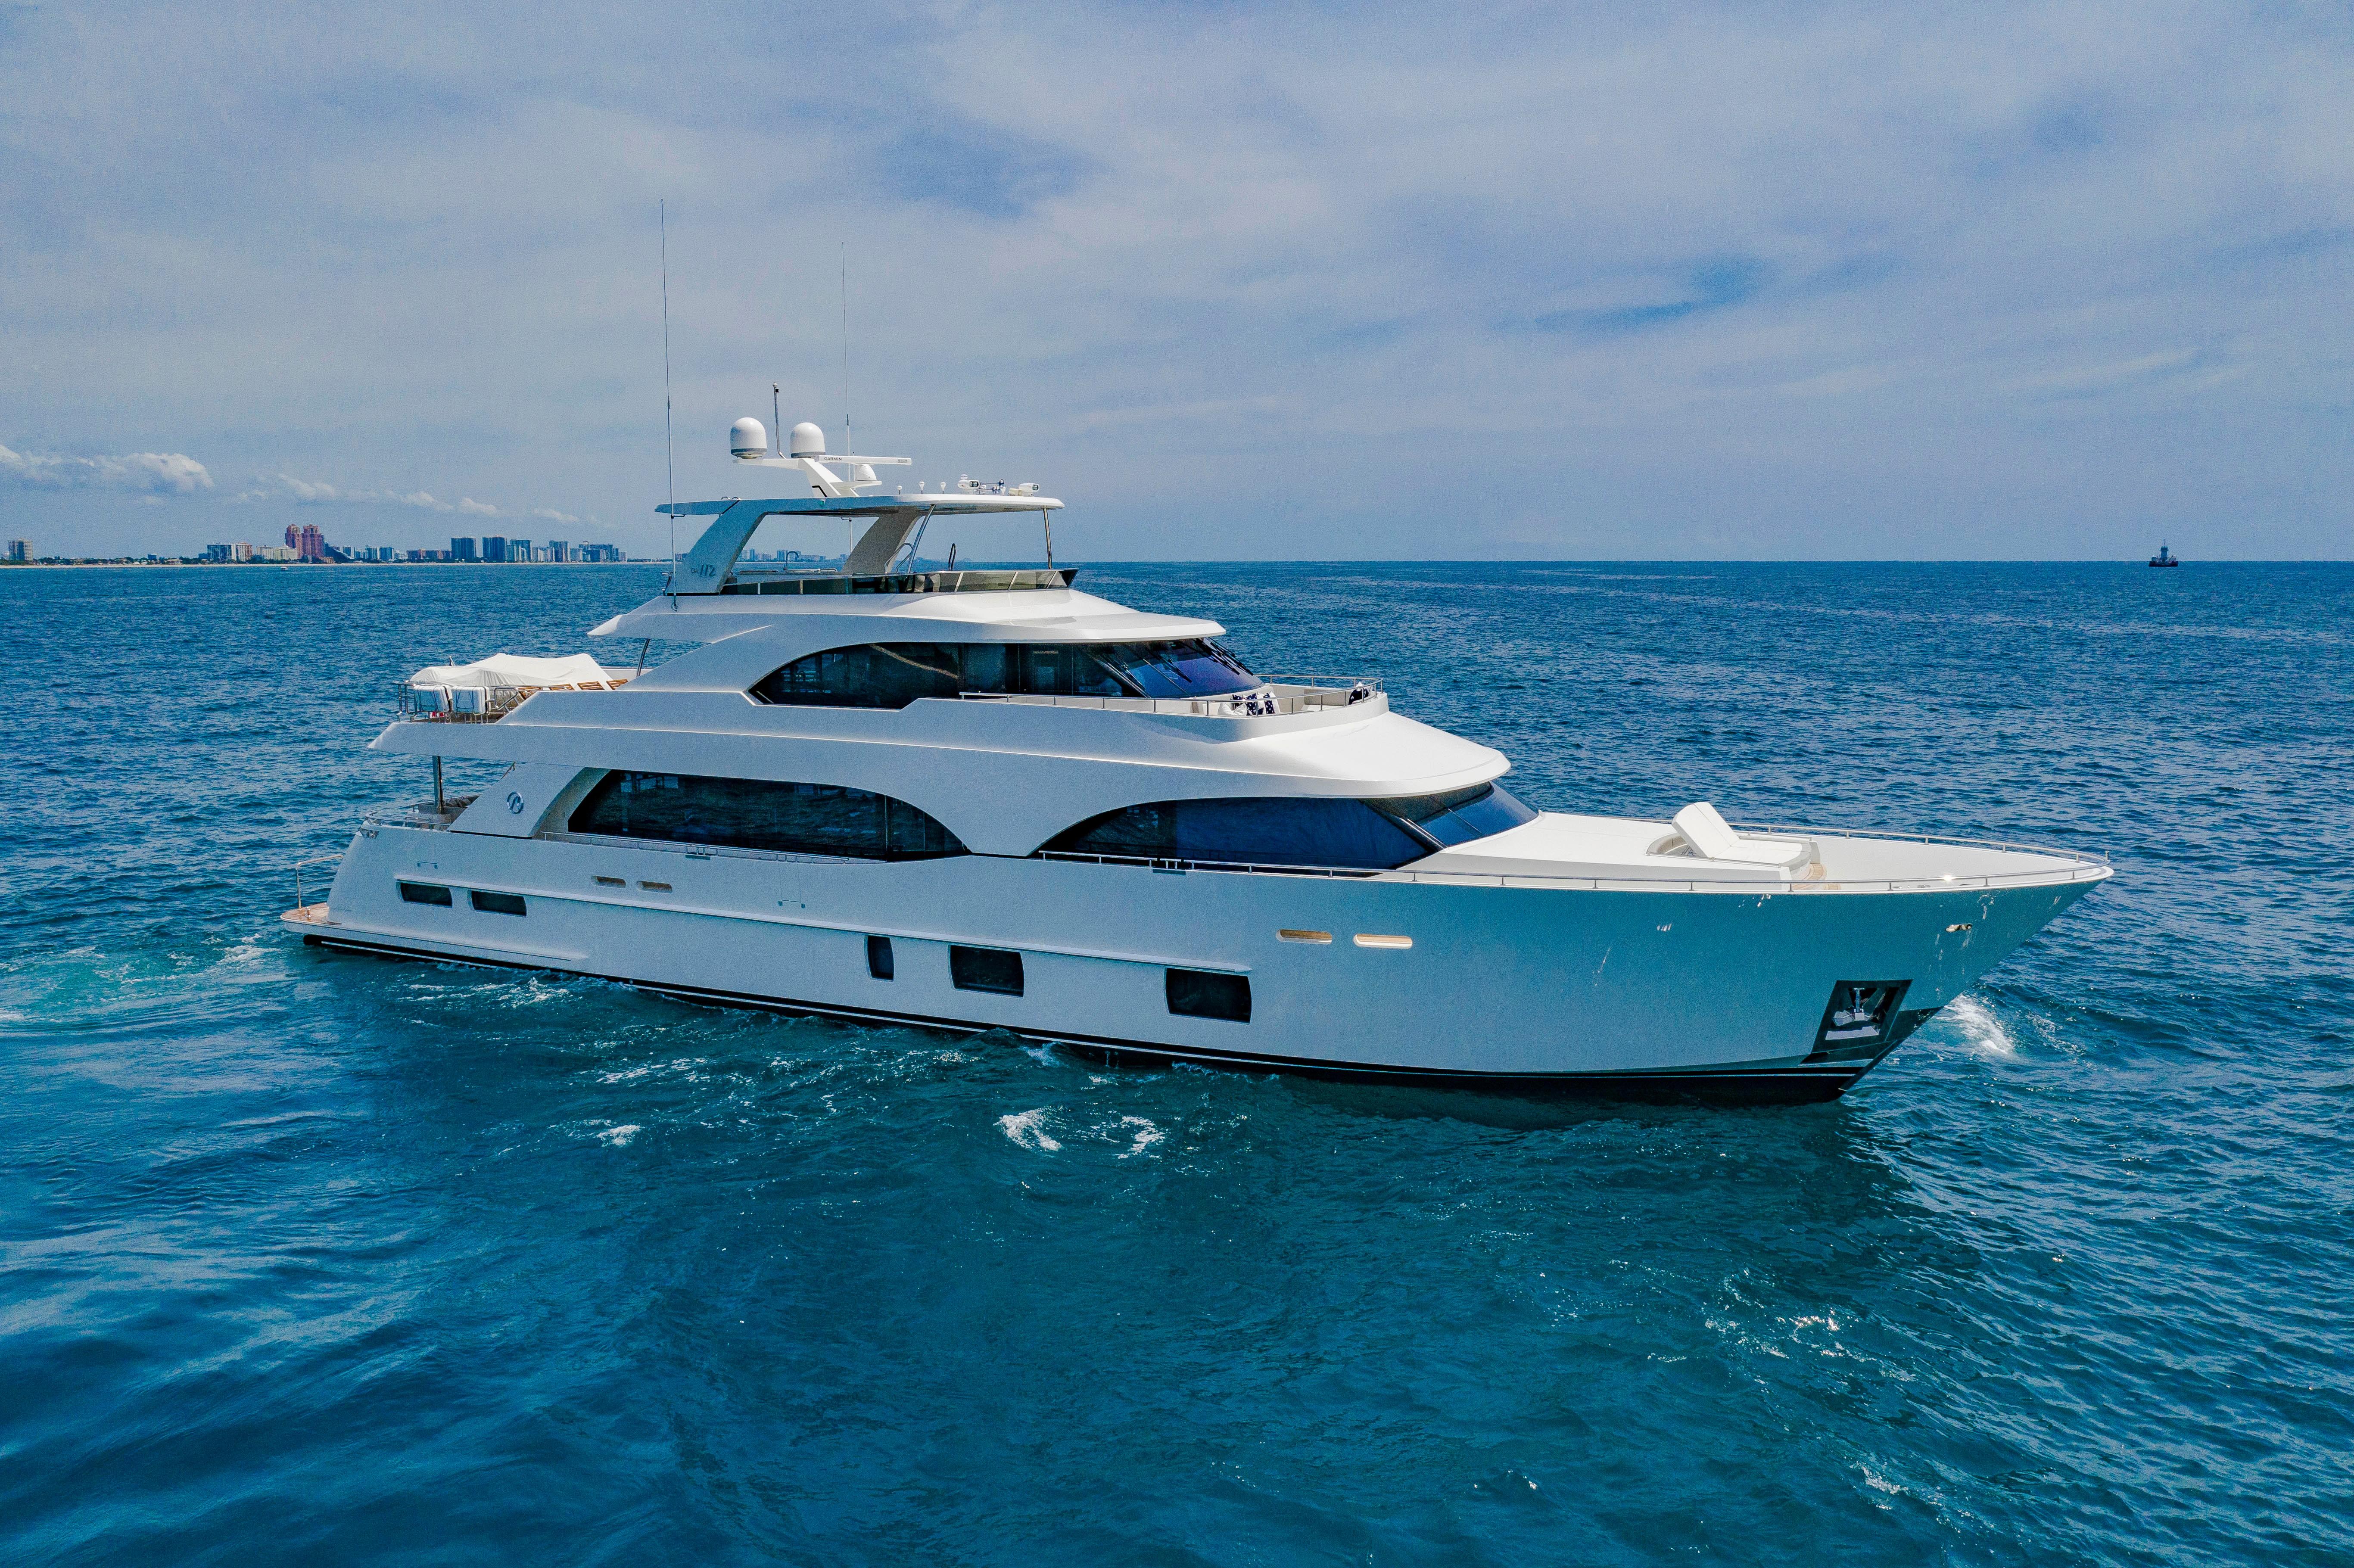 ocean going yachts for sale usa